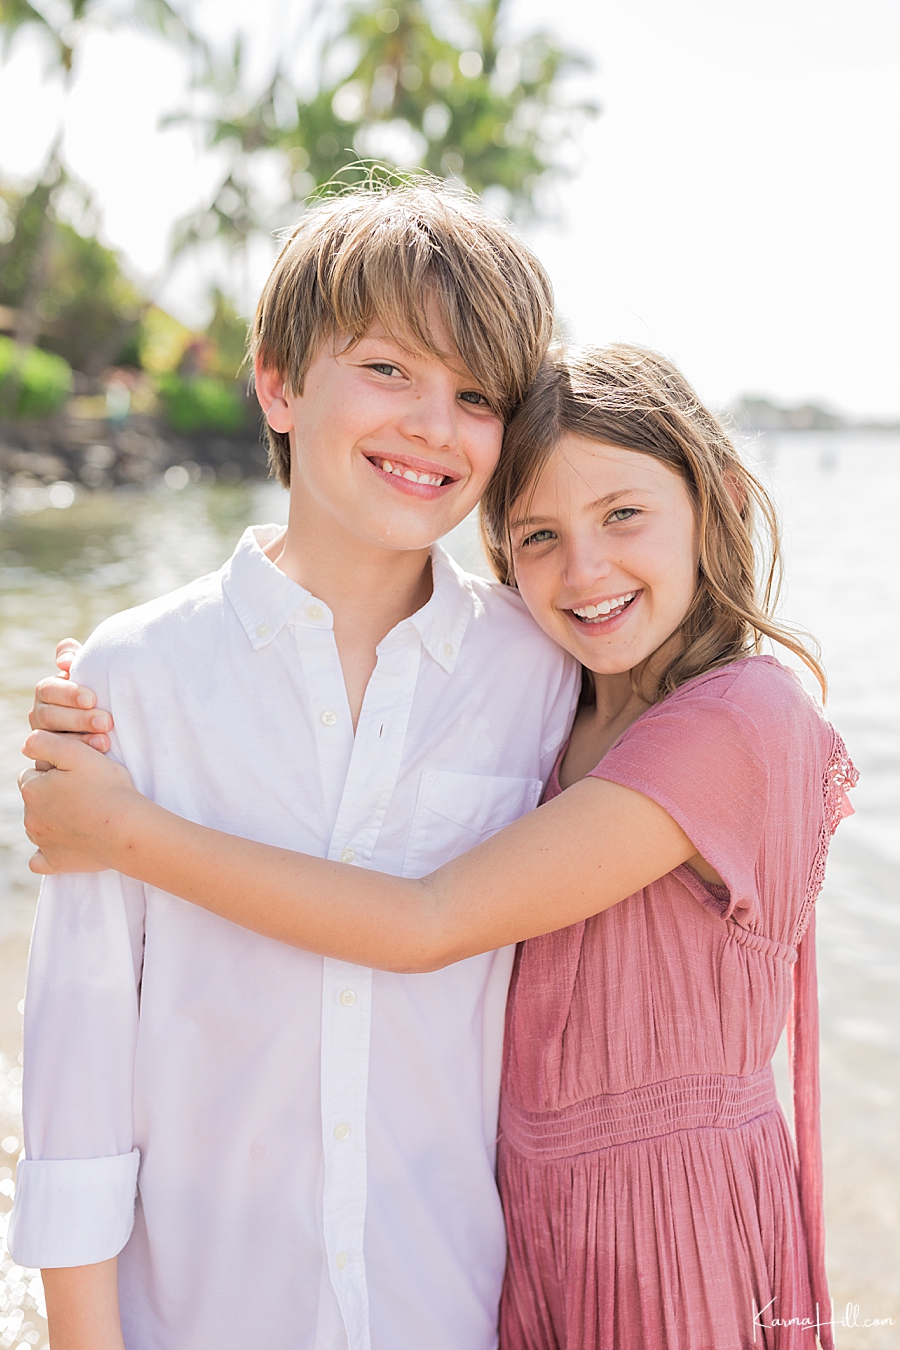 cute photos of a young brother and sister hugging on maui beach 